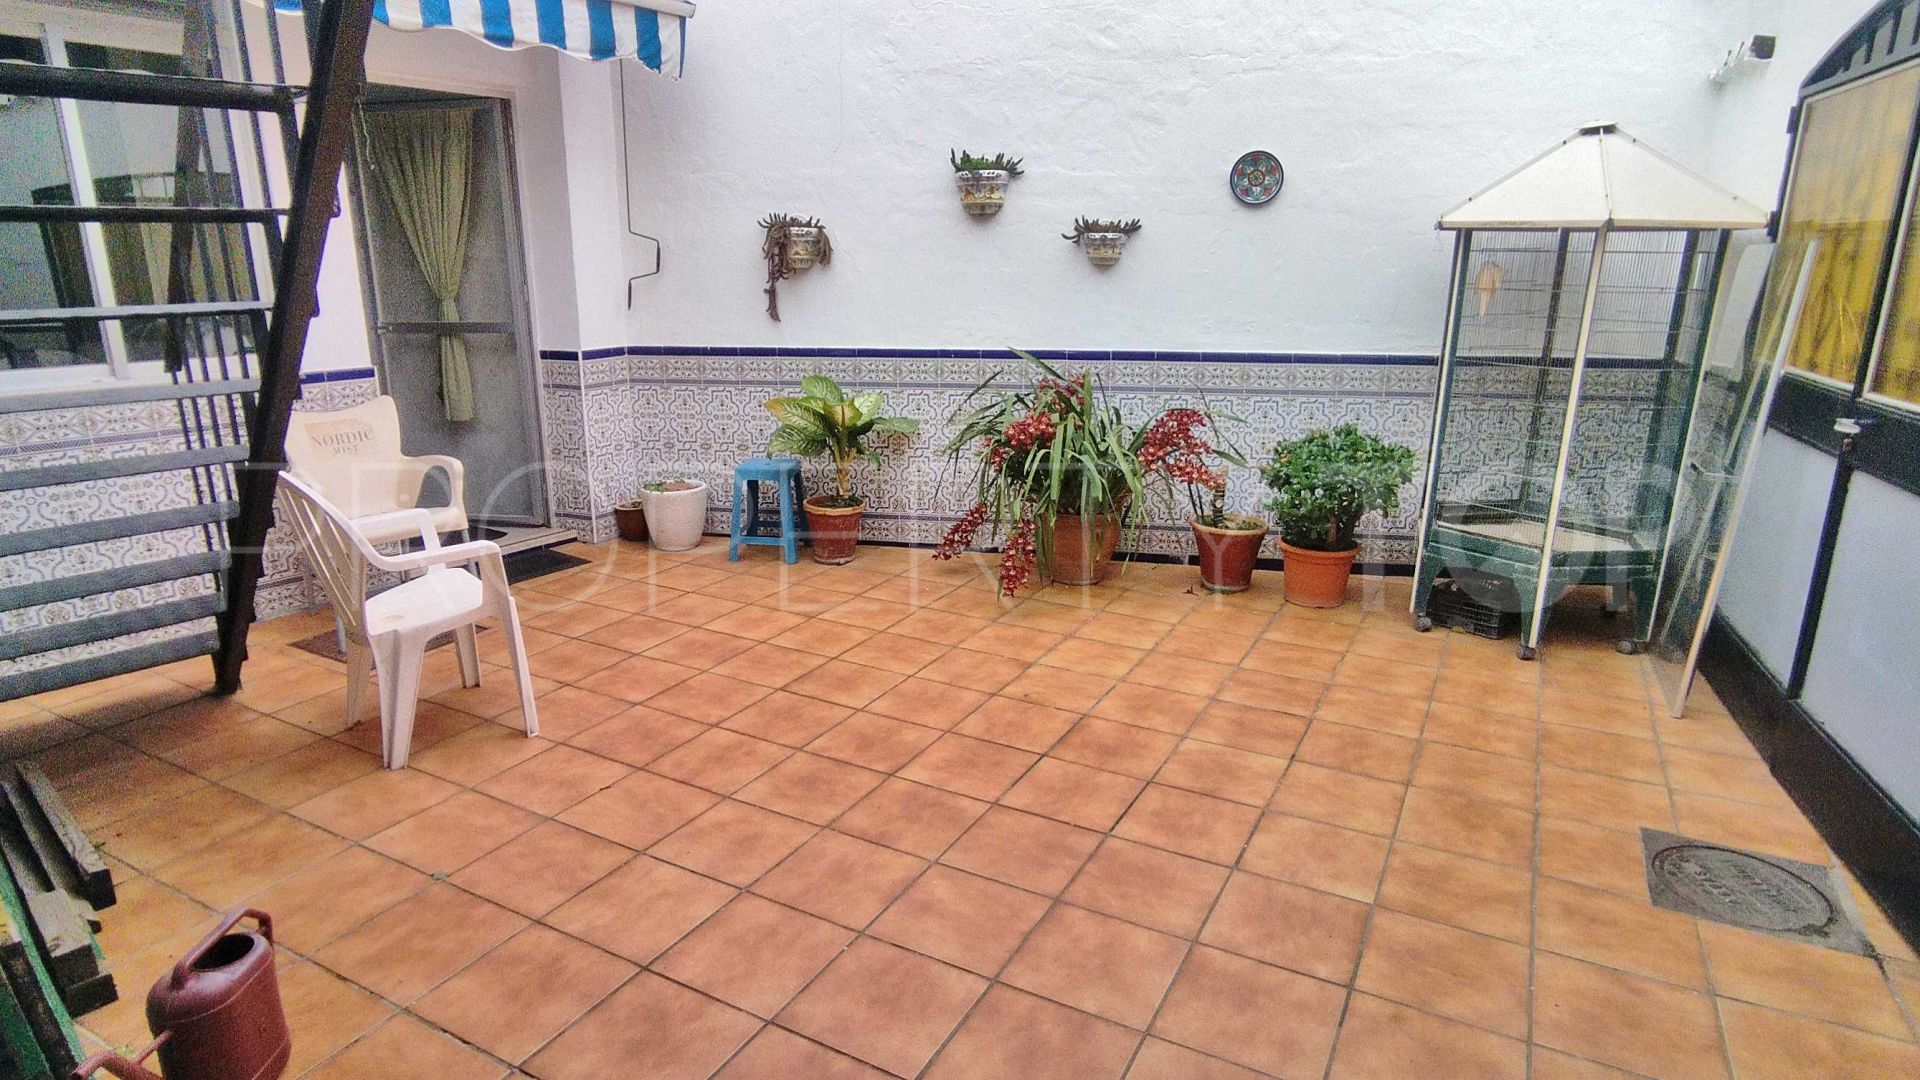 5 bedrooms Estepona Old Town town house for sale